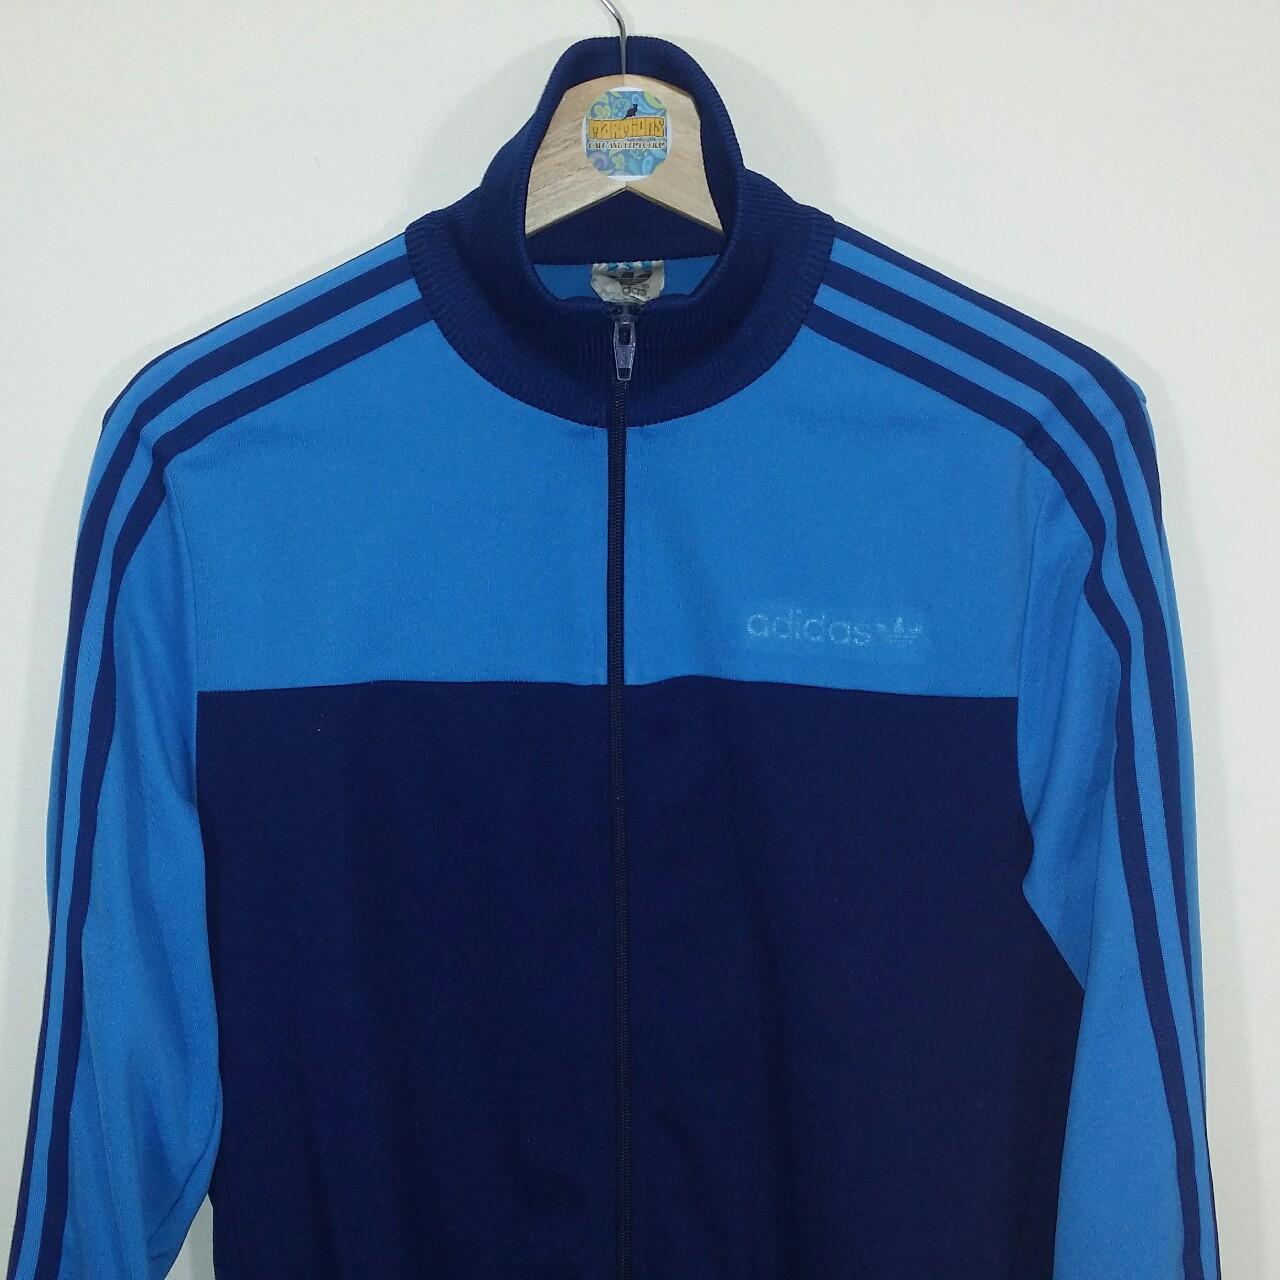 VINTAGE ADIDAS LATE 1970'S EARLY 80'S MADE IN... - Depop